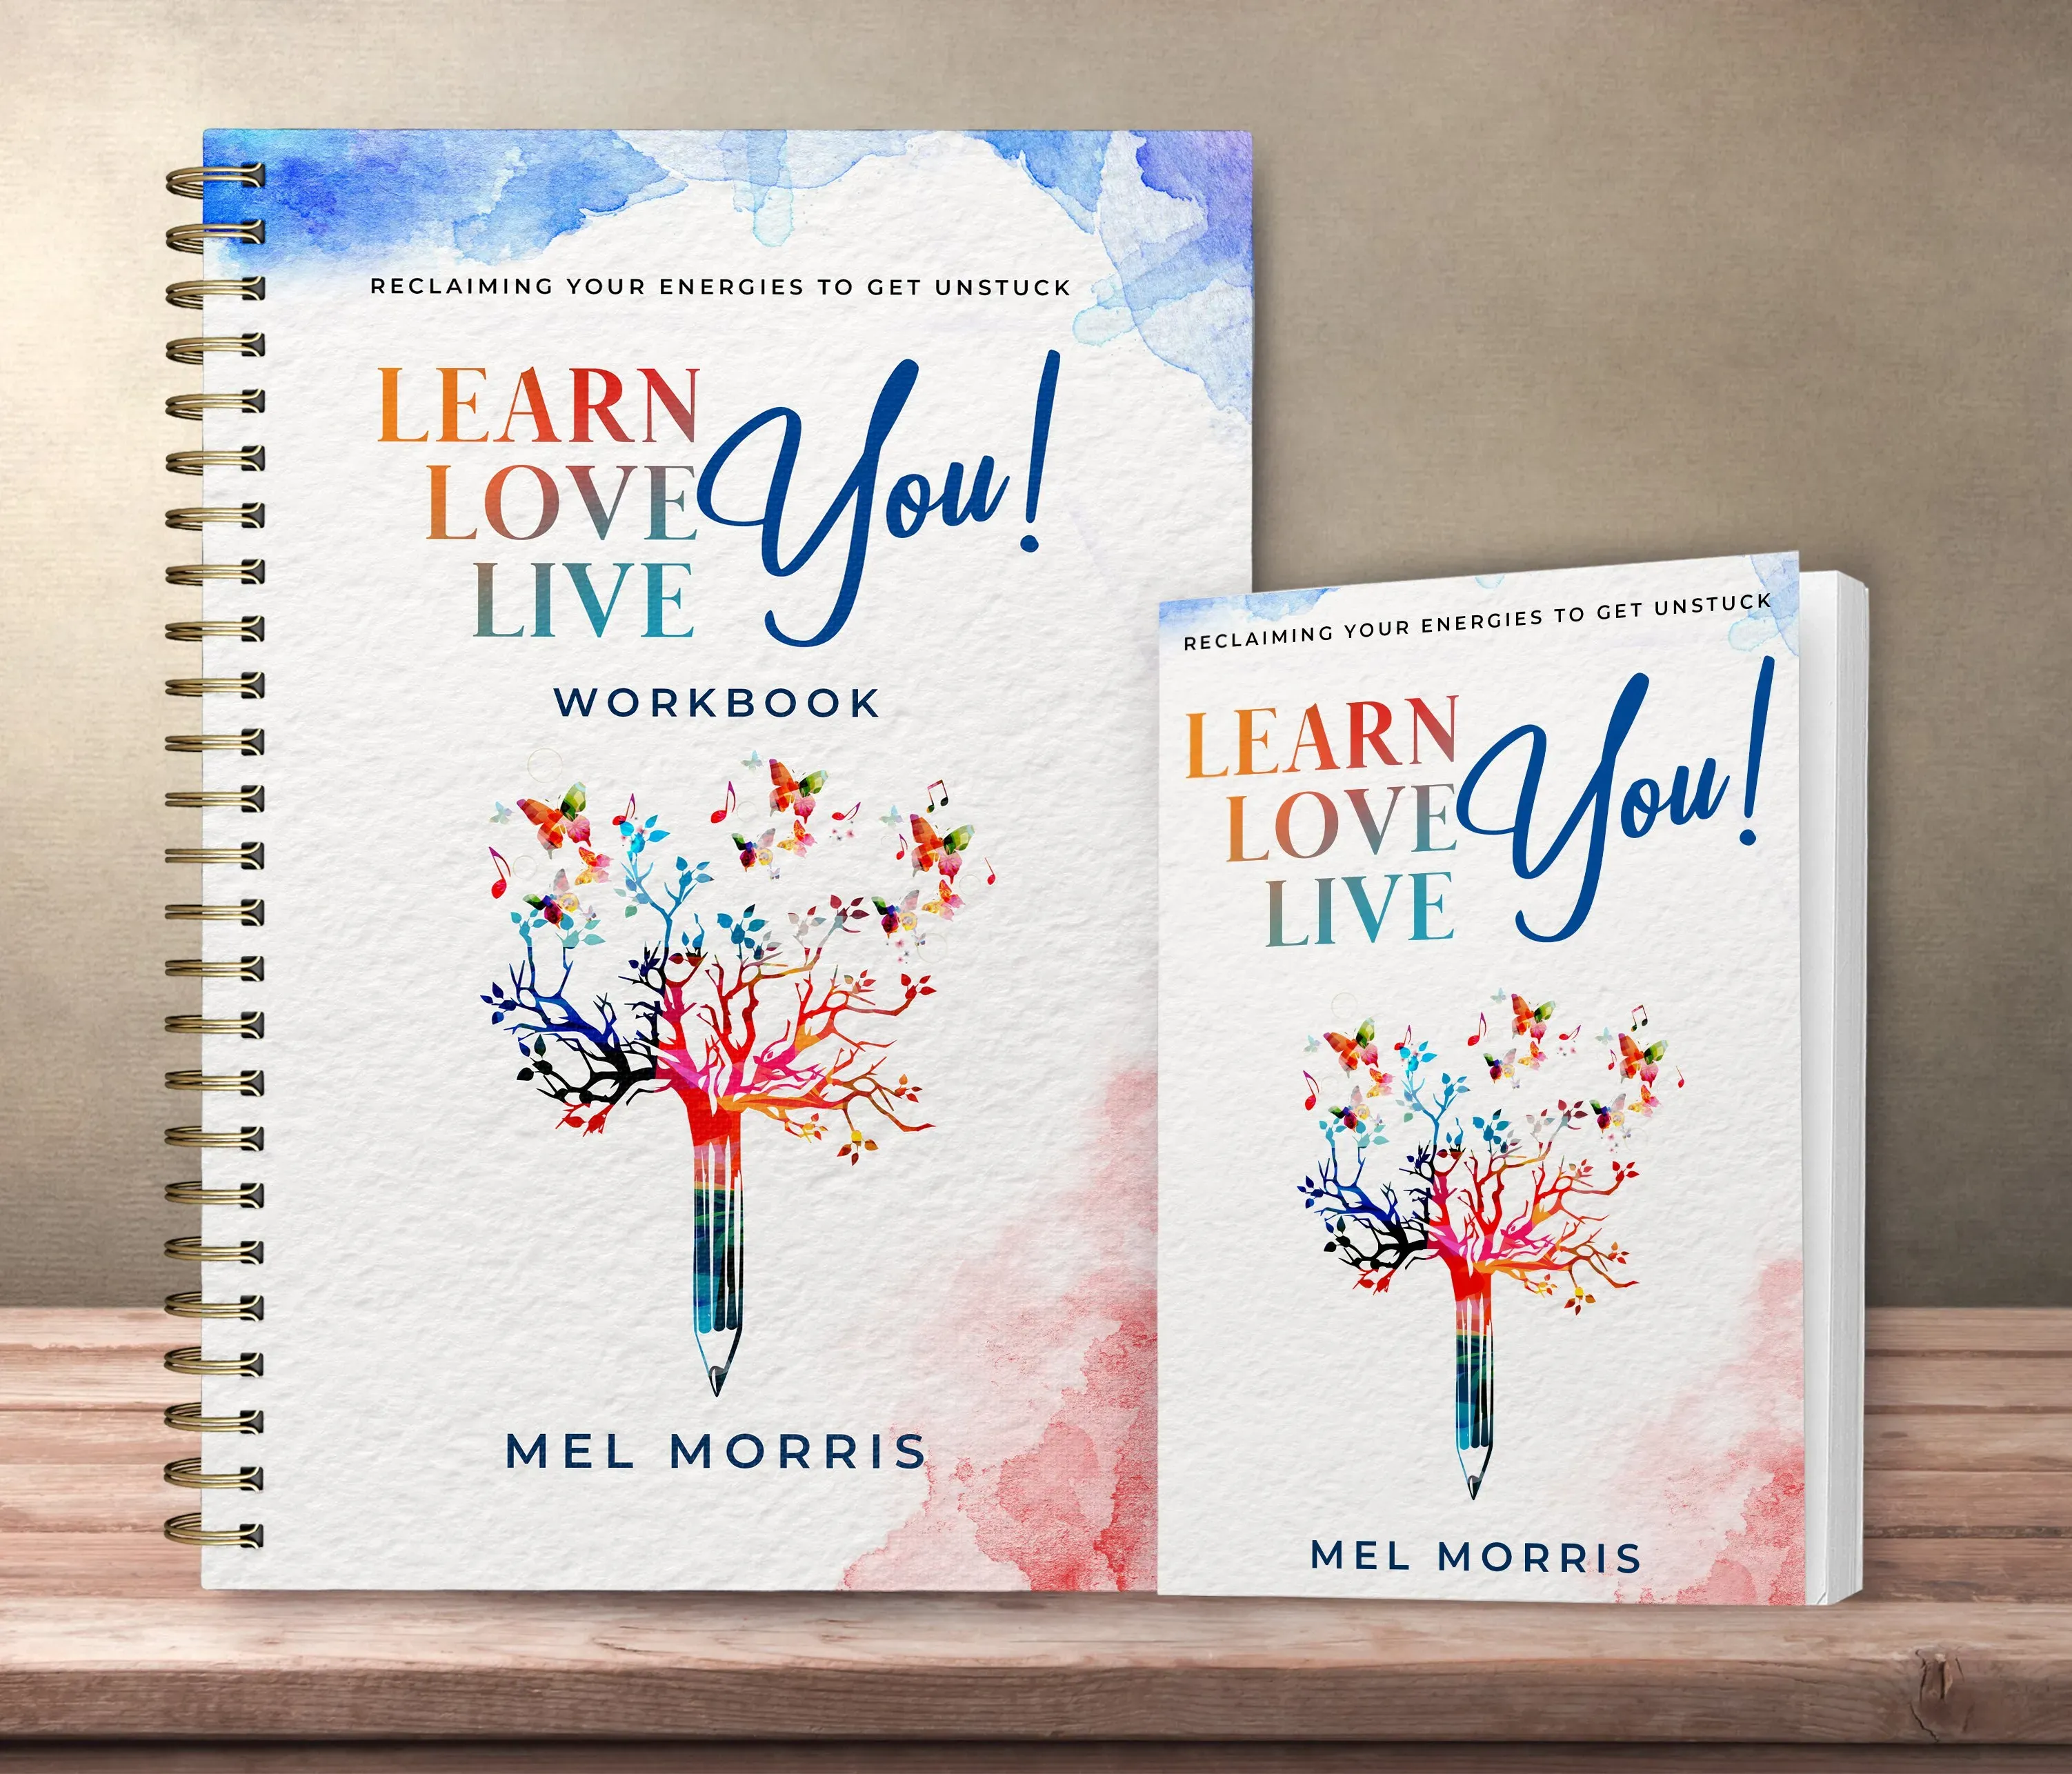 Learn Love Live You! Book and workbook on display